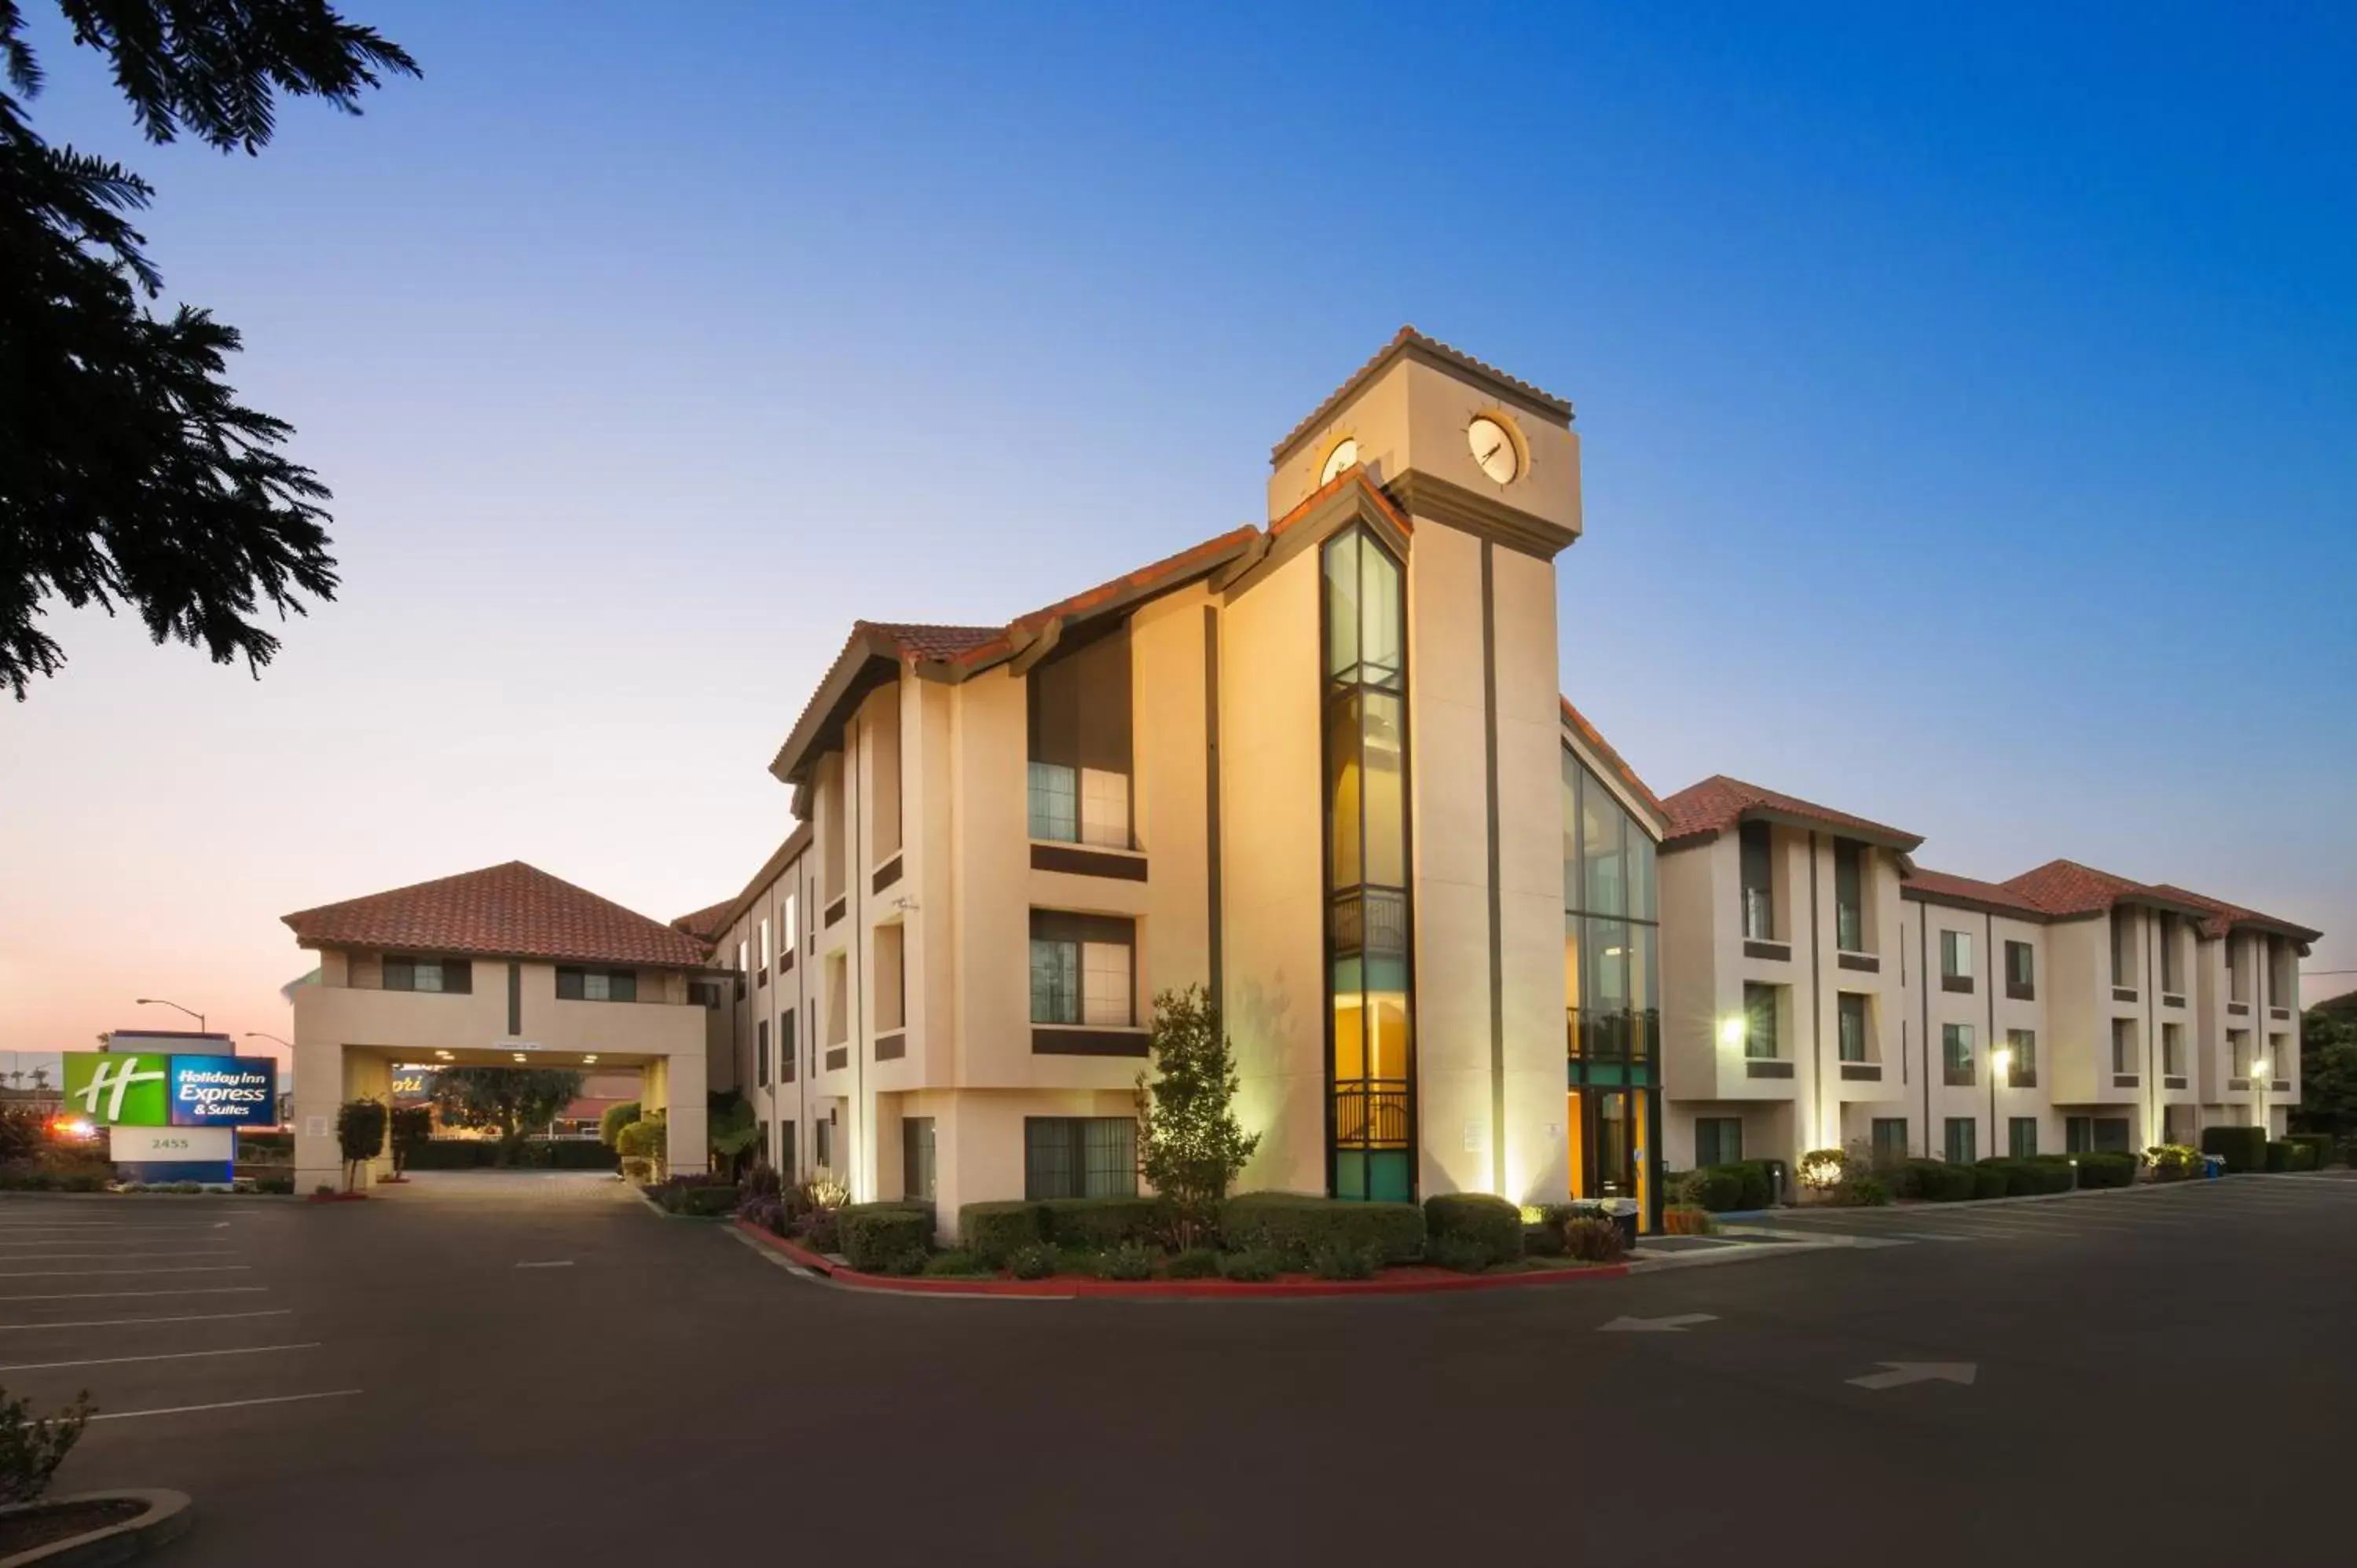 Property Building in Holiday Inn Express Hotel & Suites Santa Clara - Silicon Valley, an IHG Hotel